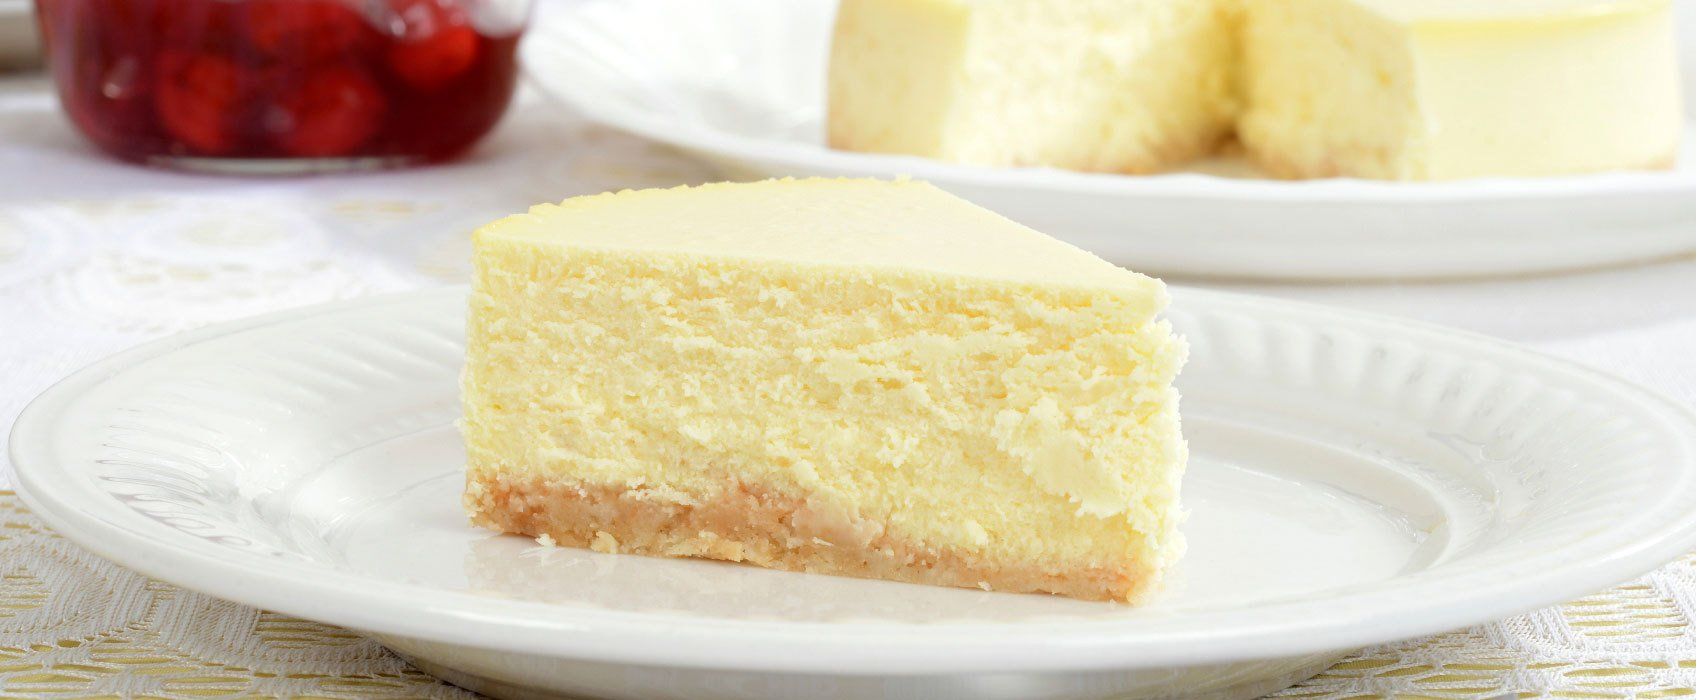 order New York's best cheesecake from Jonathan Lord Cheesecakes & Desserts